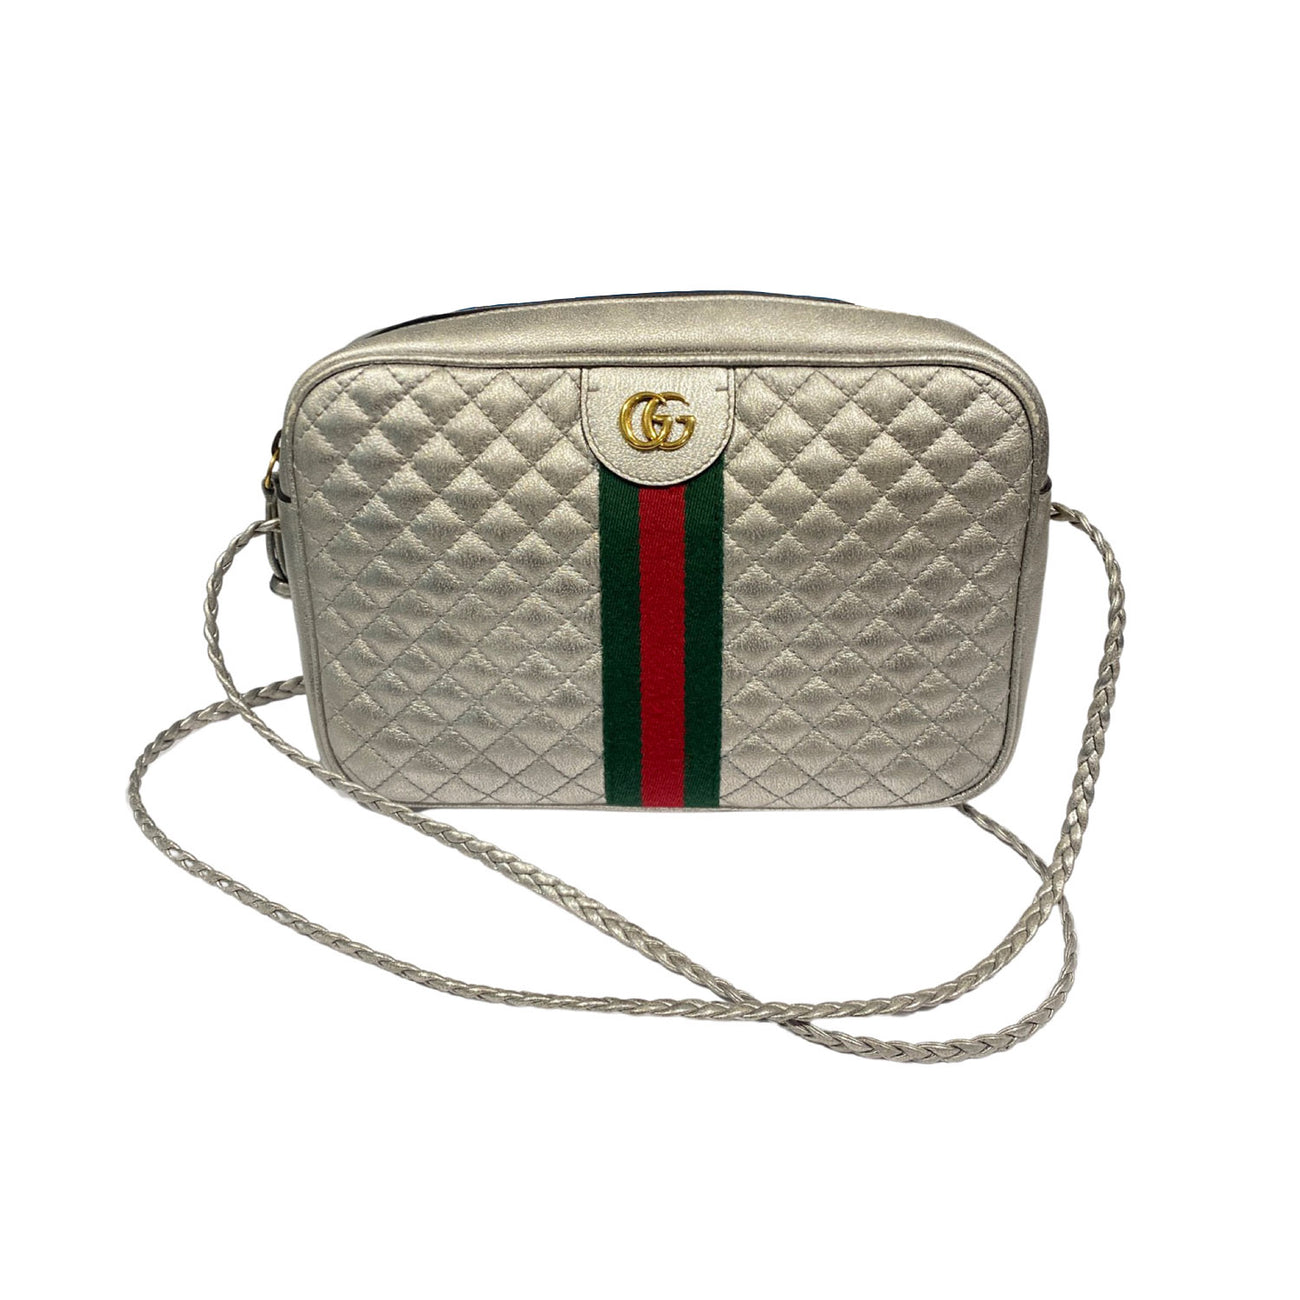 Authentic Gucci Messenger Bag Mens With Dust Bag